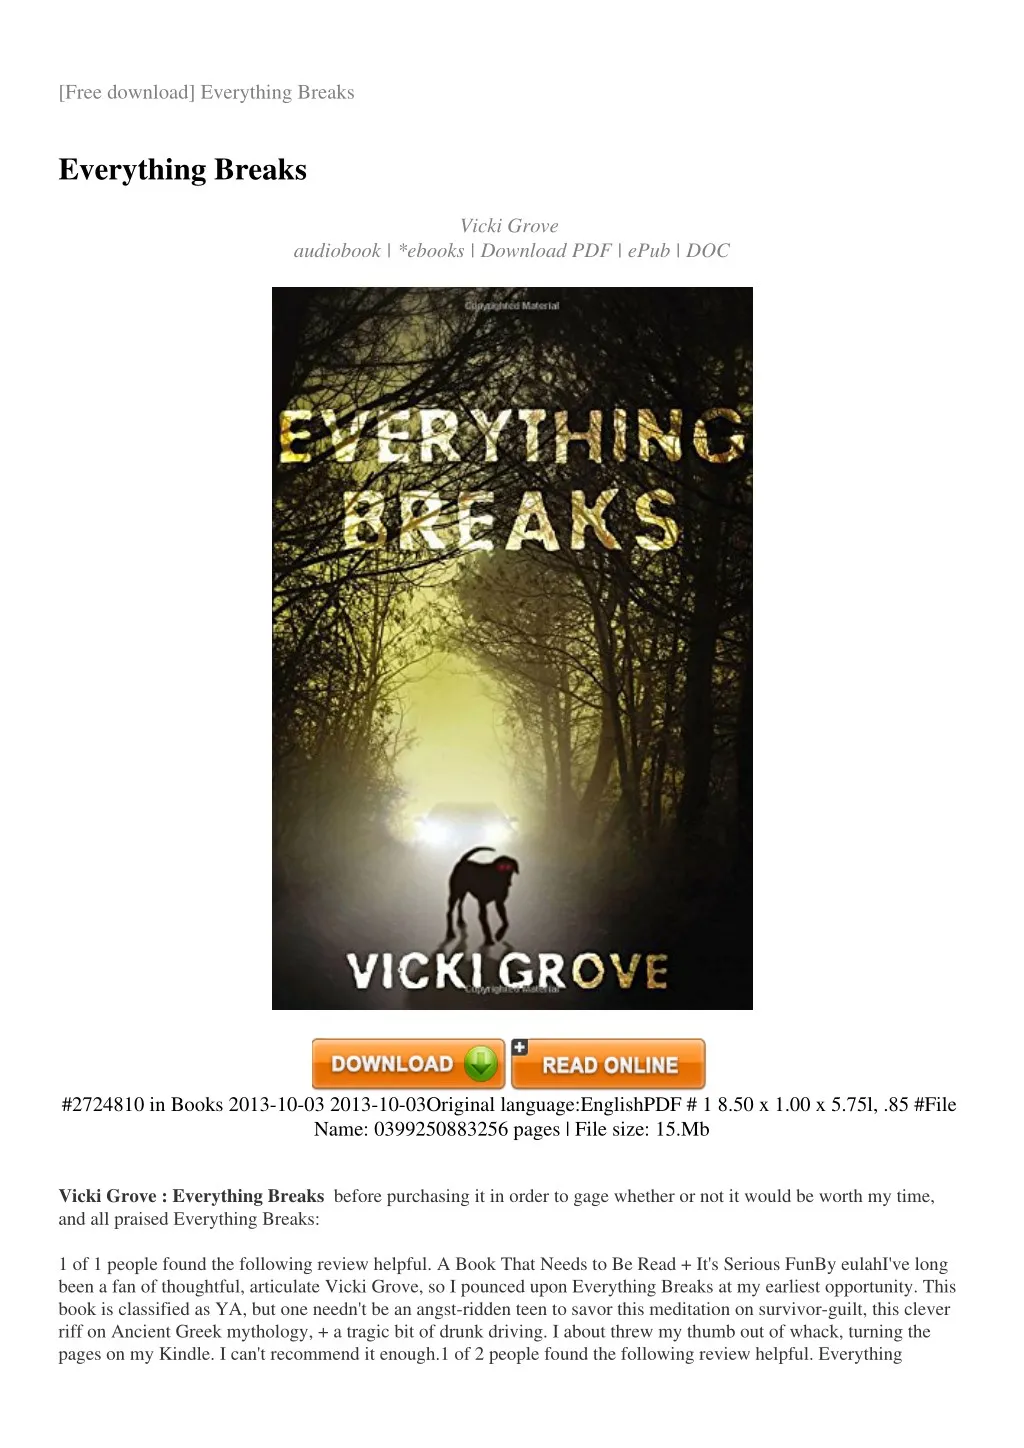 free download everything breaks